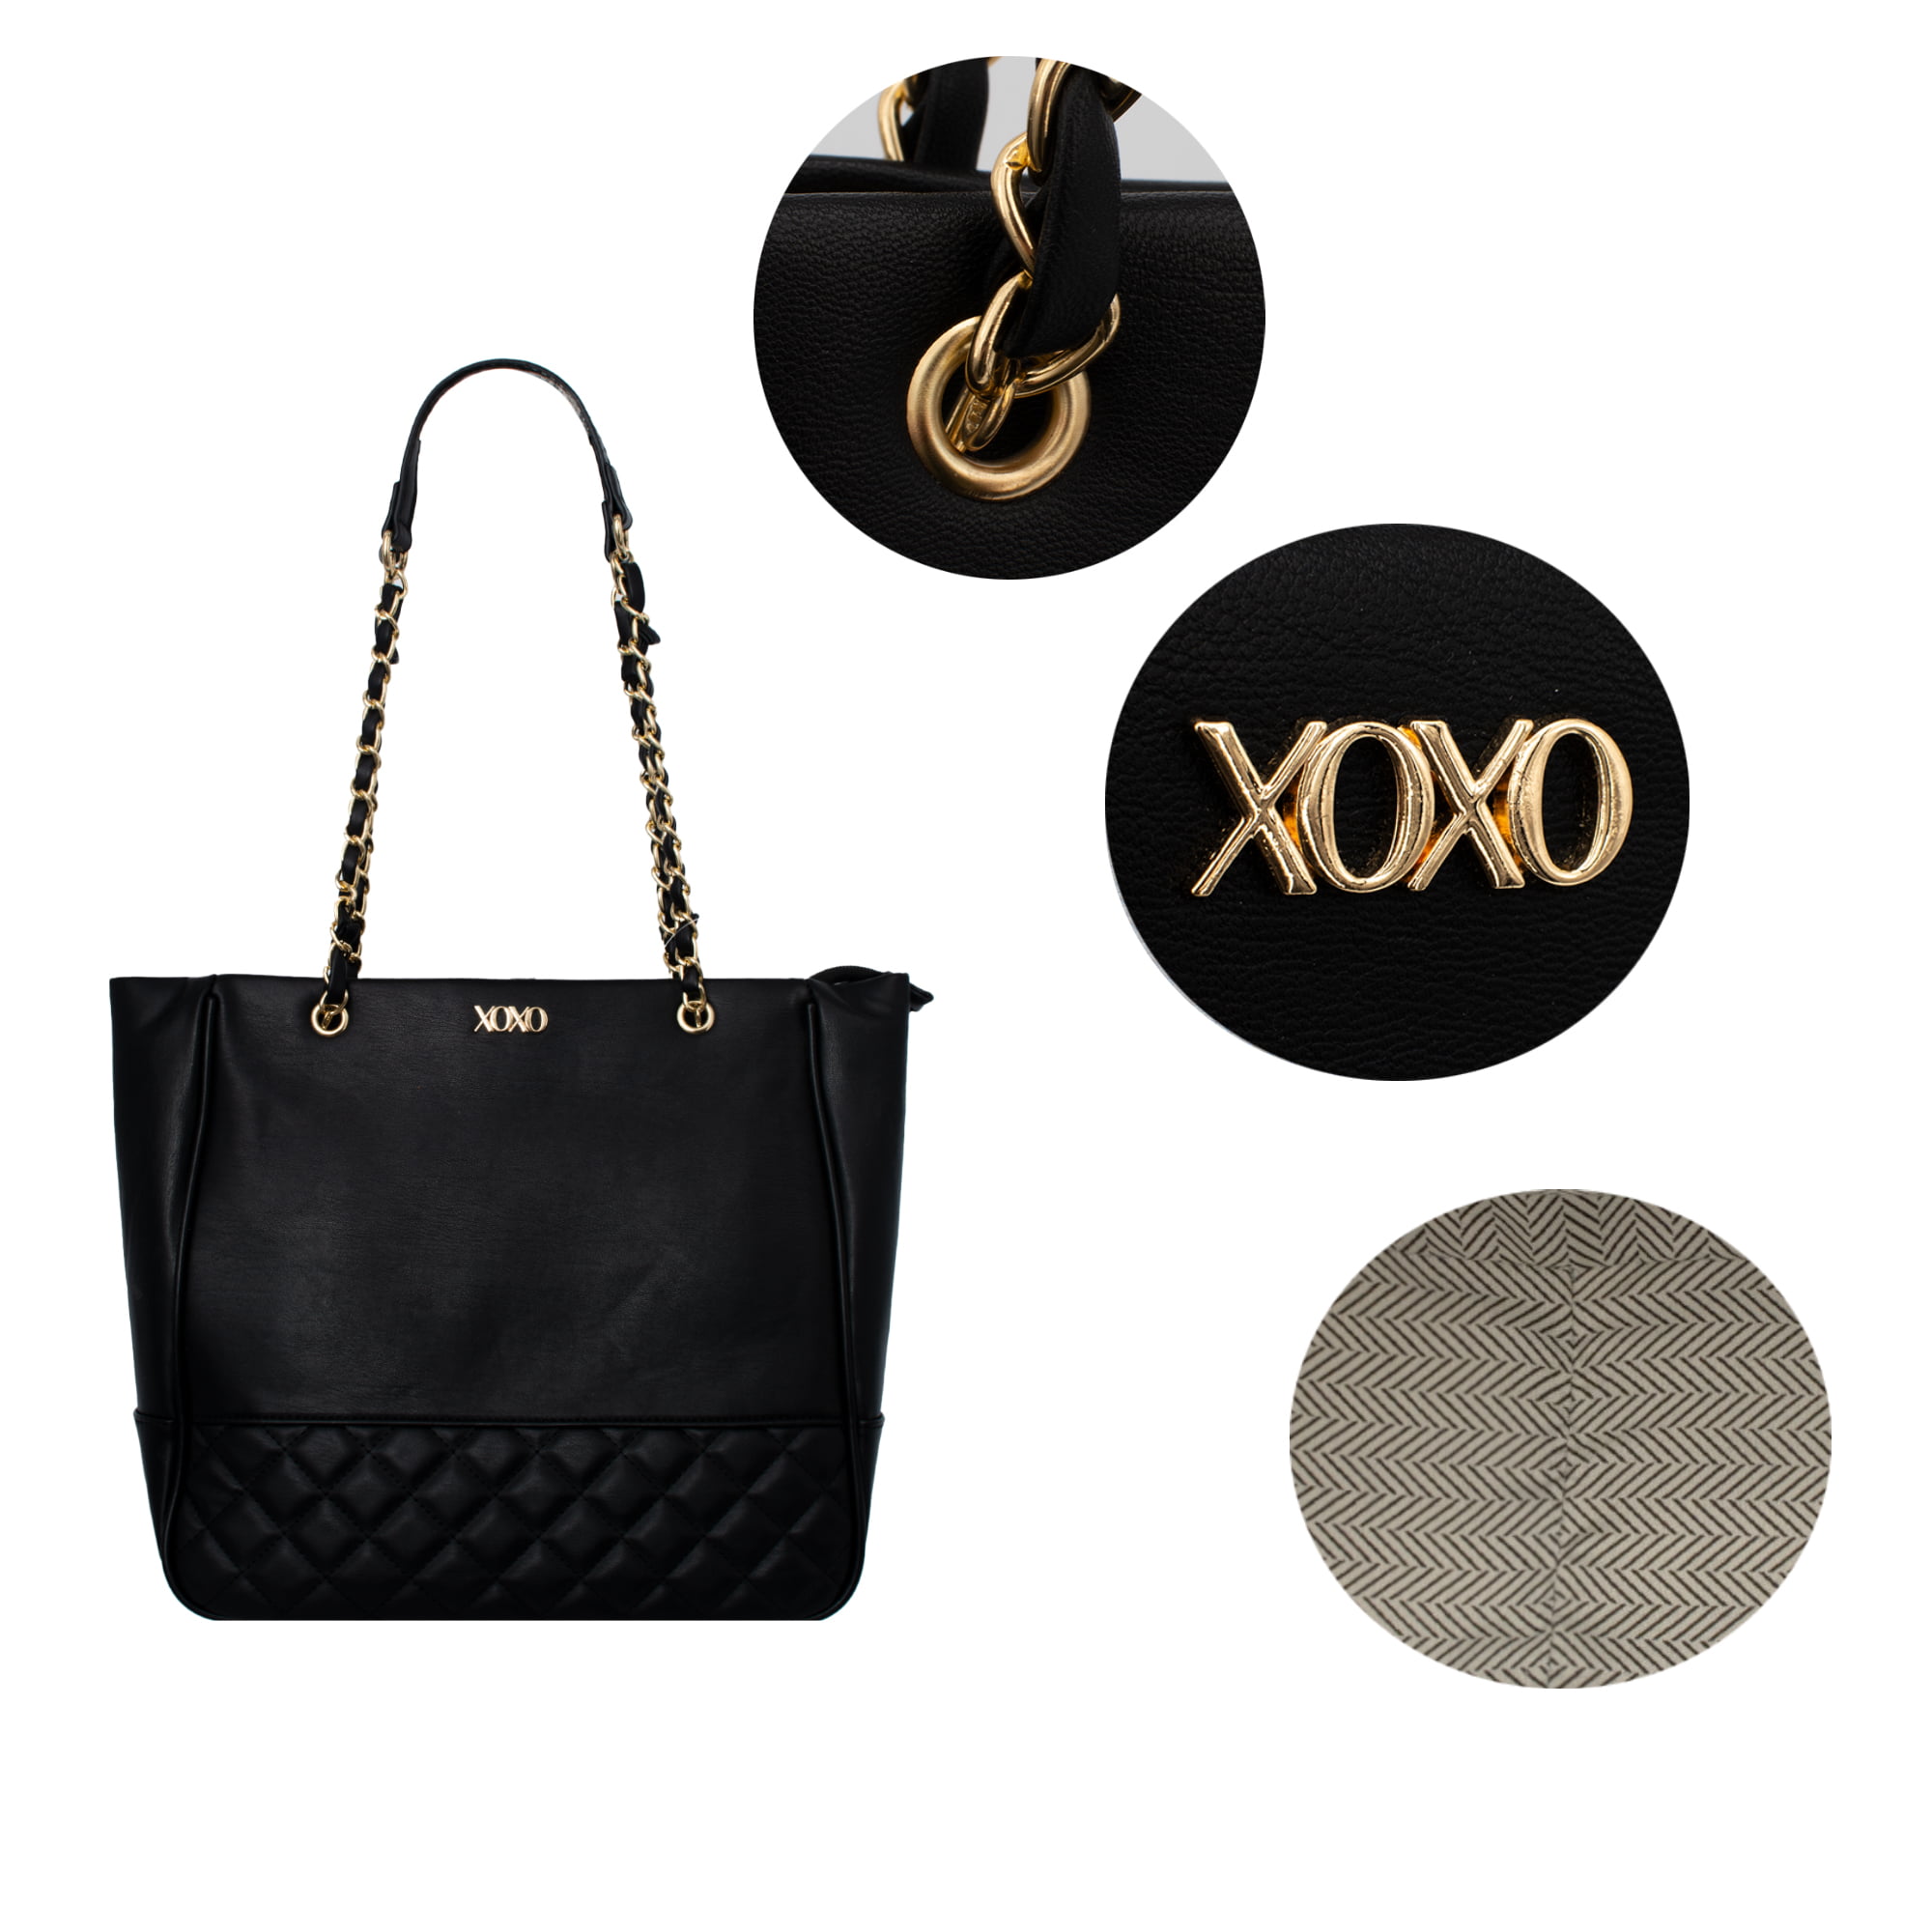 XOXO Women's Black Vegan Leather Quilted Tote Bag With Chain Handle 